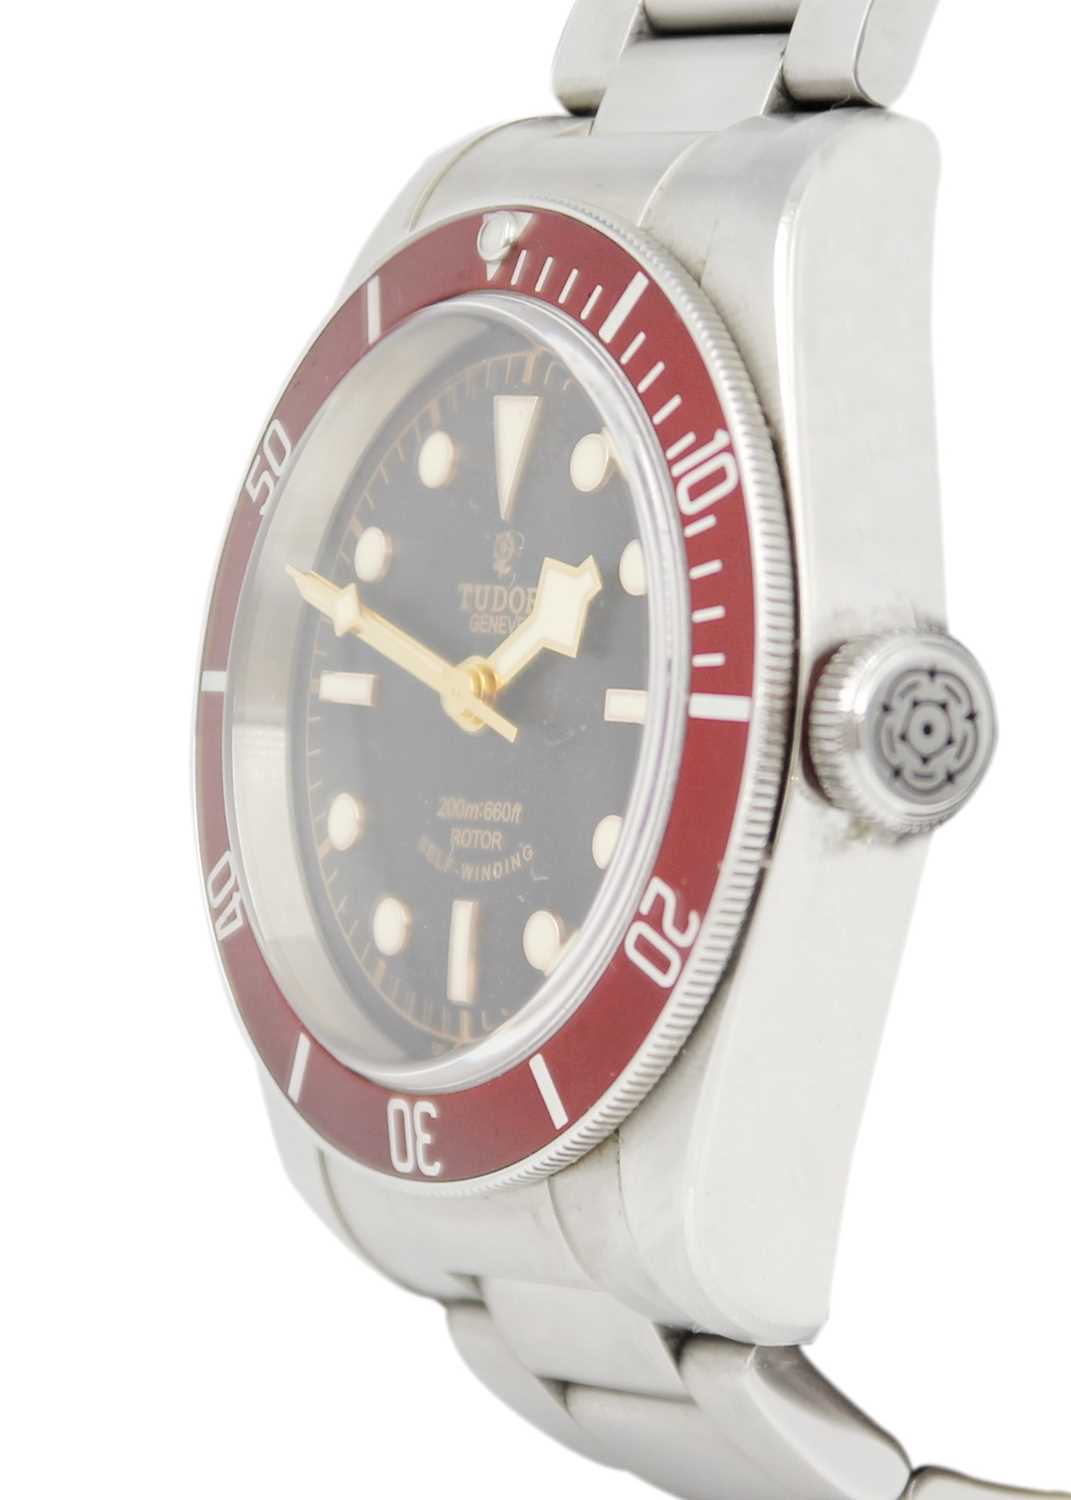 TUDOR - A Tudor Black Bay Heritage gentleman's automatic stainless steel wristwatch, ref. 79220R. - Image 2 of 8